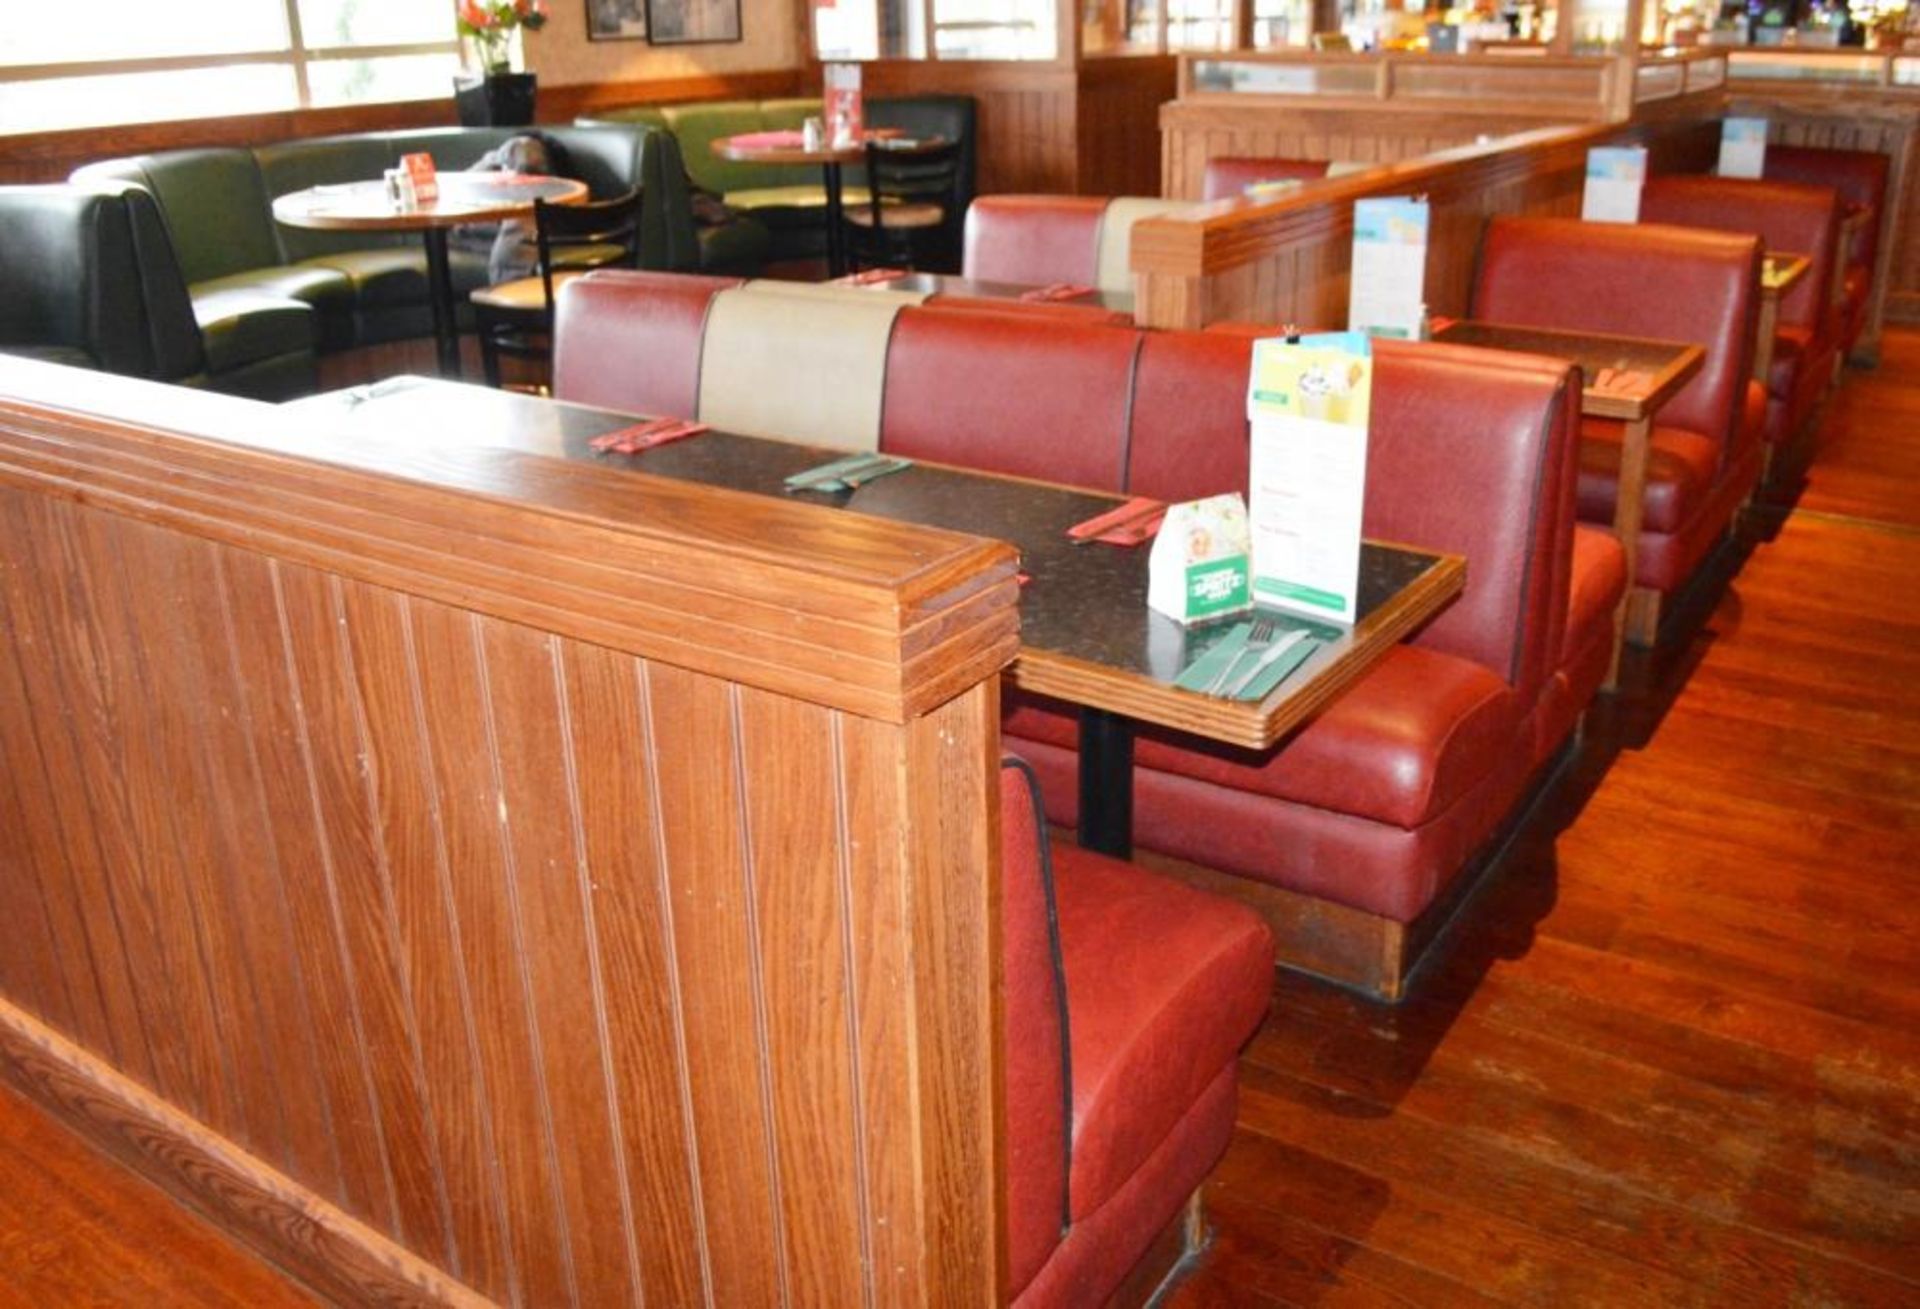 1 x Selection of Cosy Bespoke Seating Booths in a 1950's Retro American Diner Design With Dining Tab - Image 5 of 30